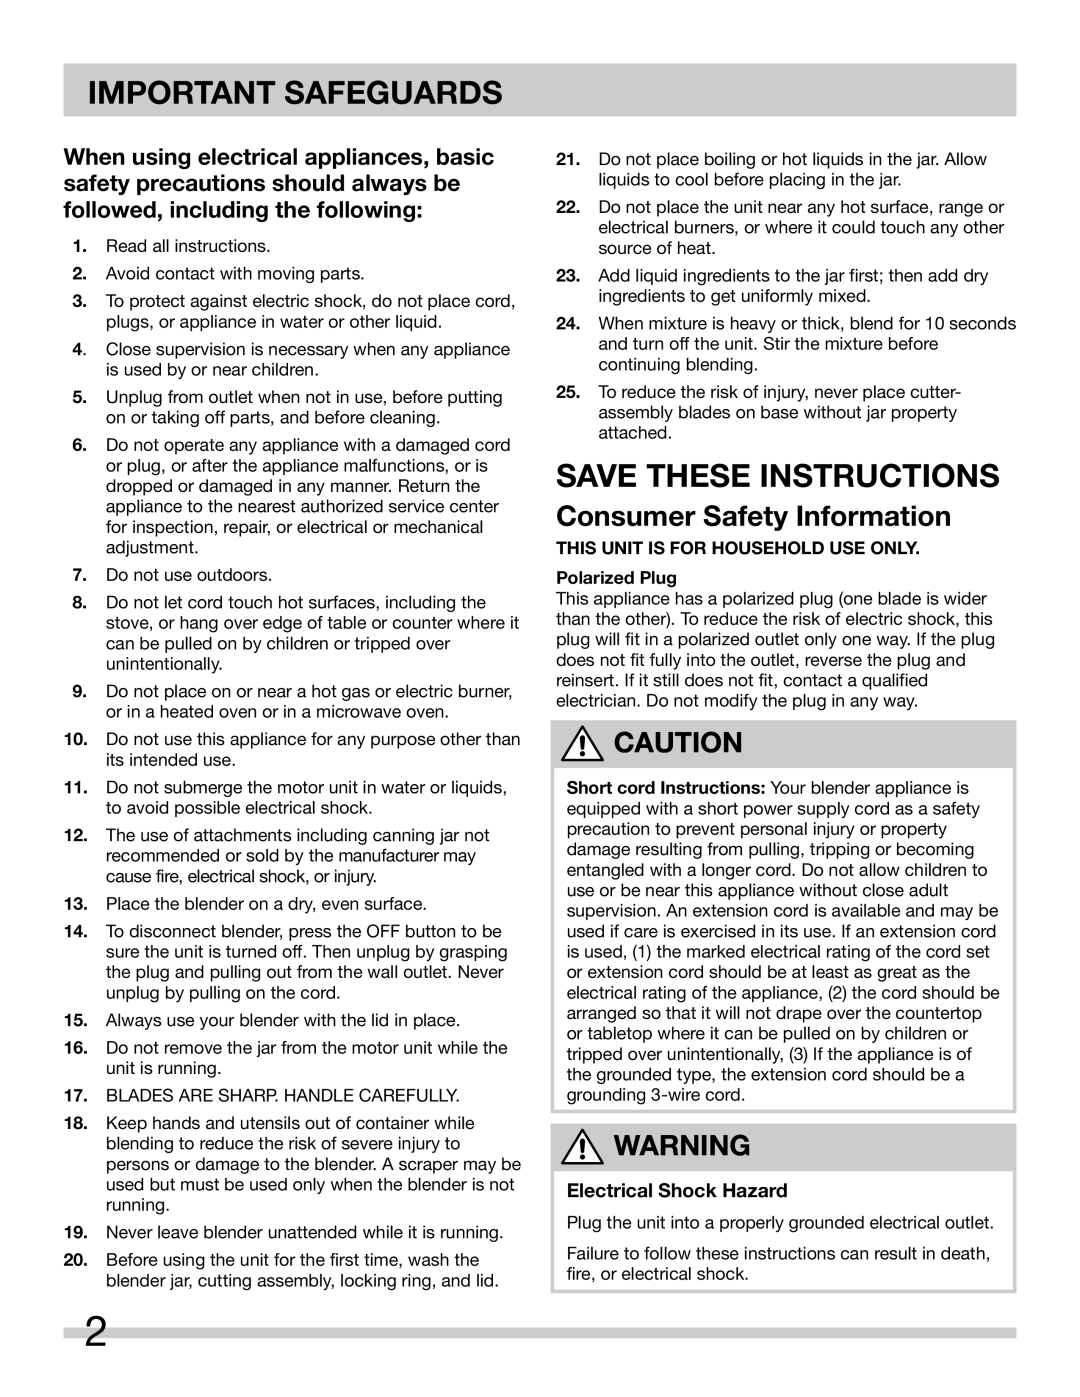 Frigidaire 900253211-UM warranty Important Safeguards, Save These Instructions, Consumer Safety Information 